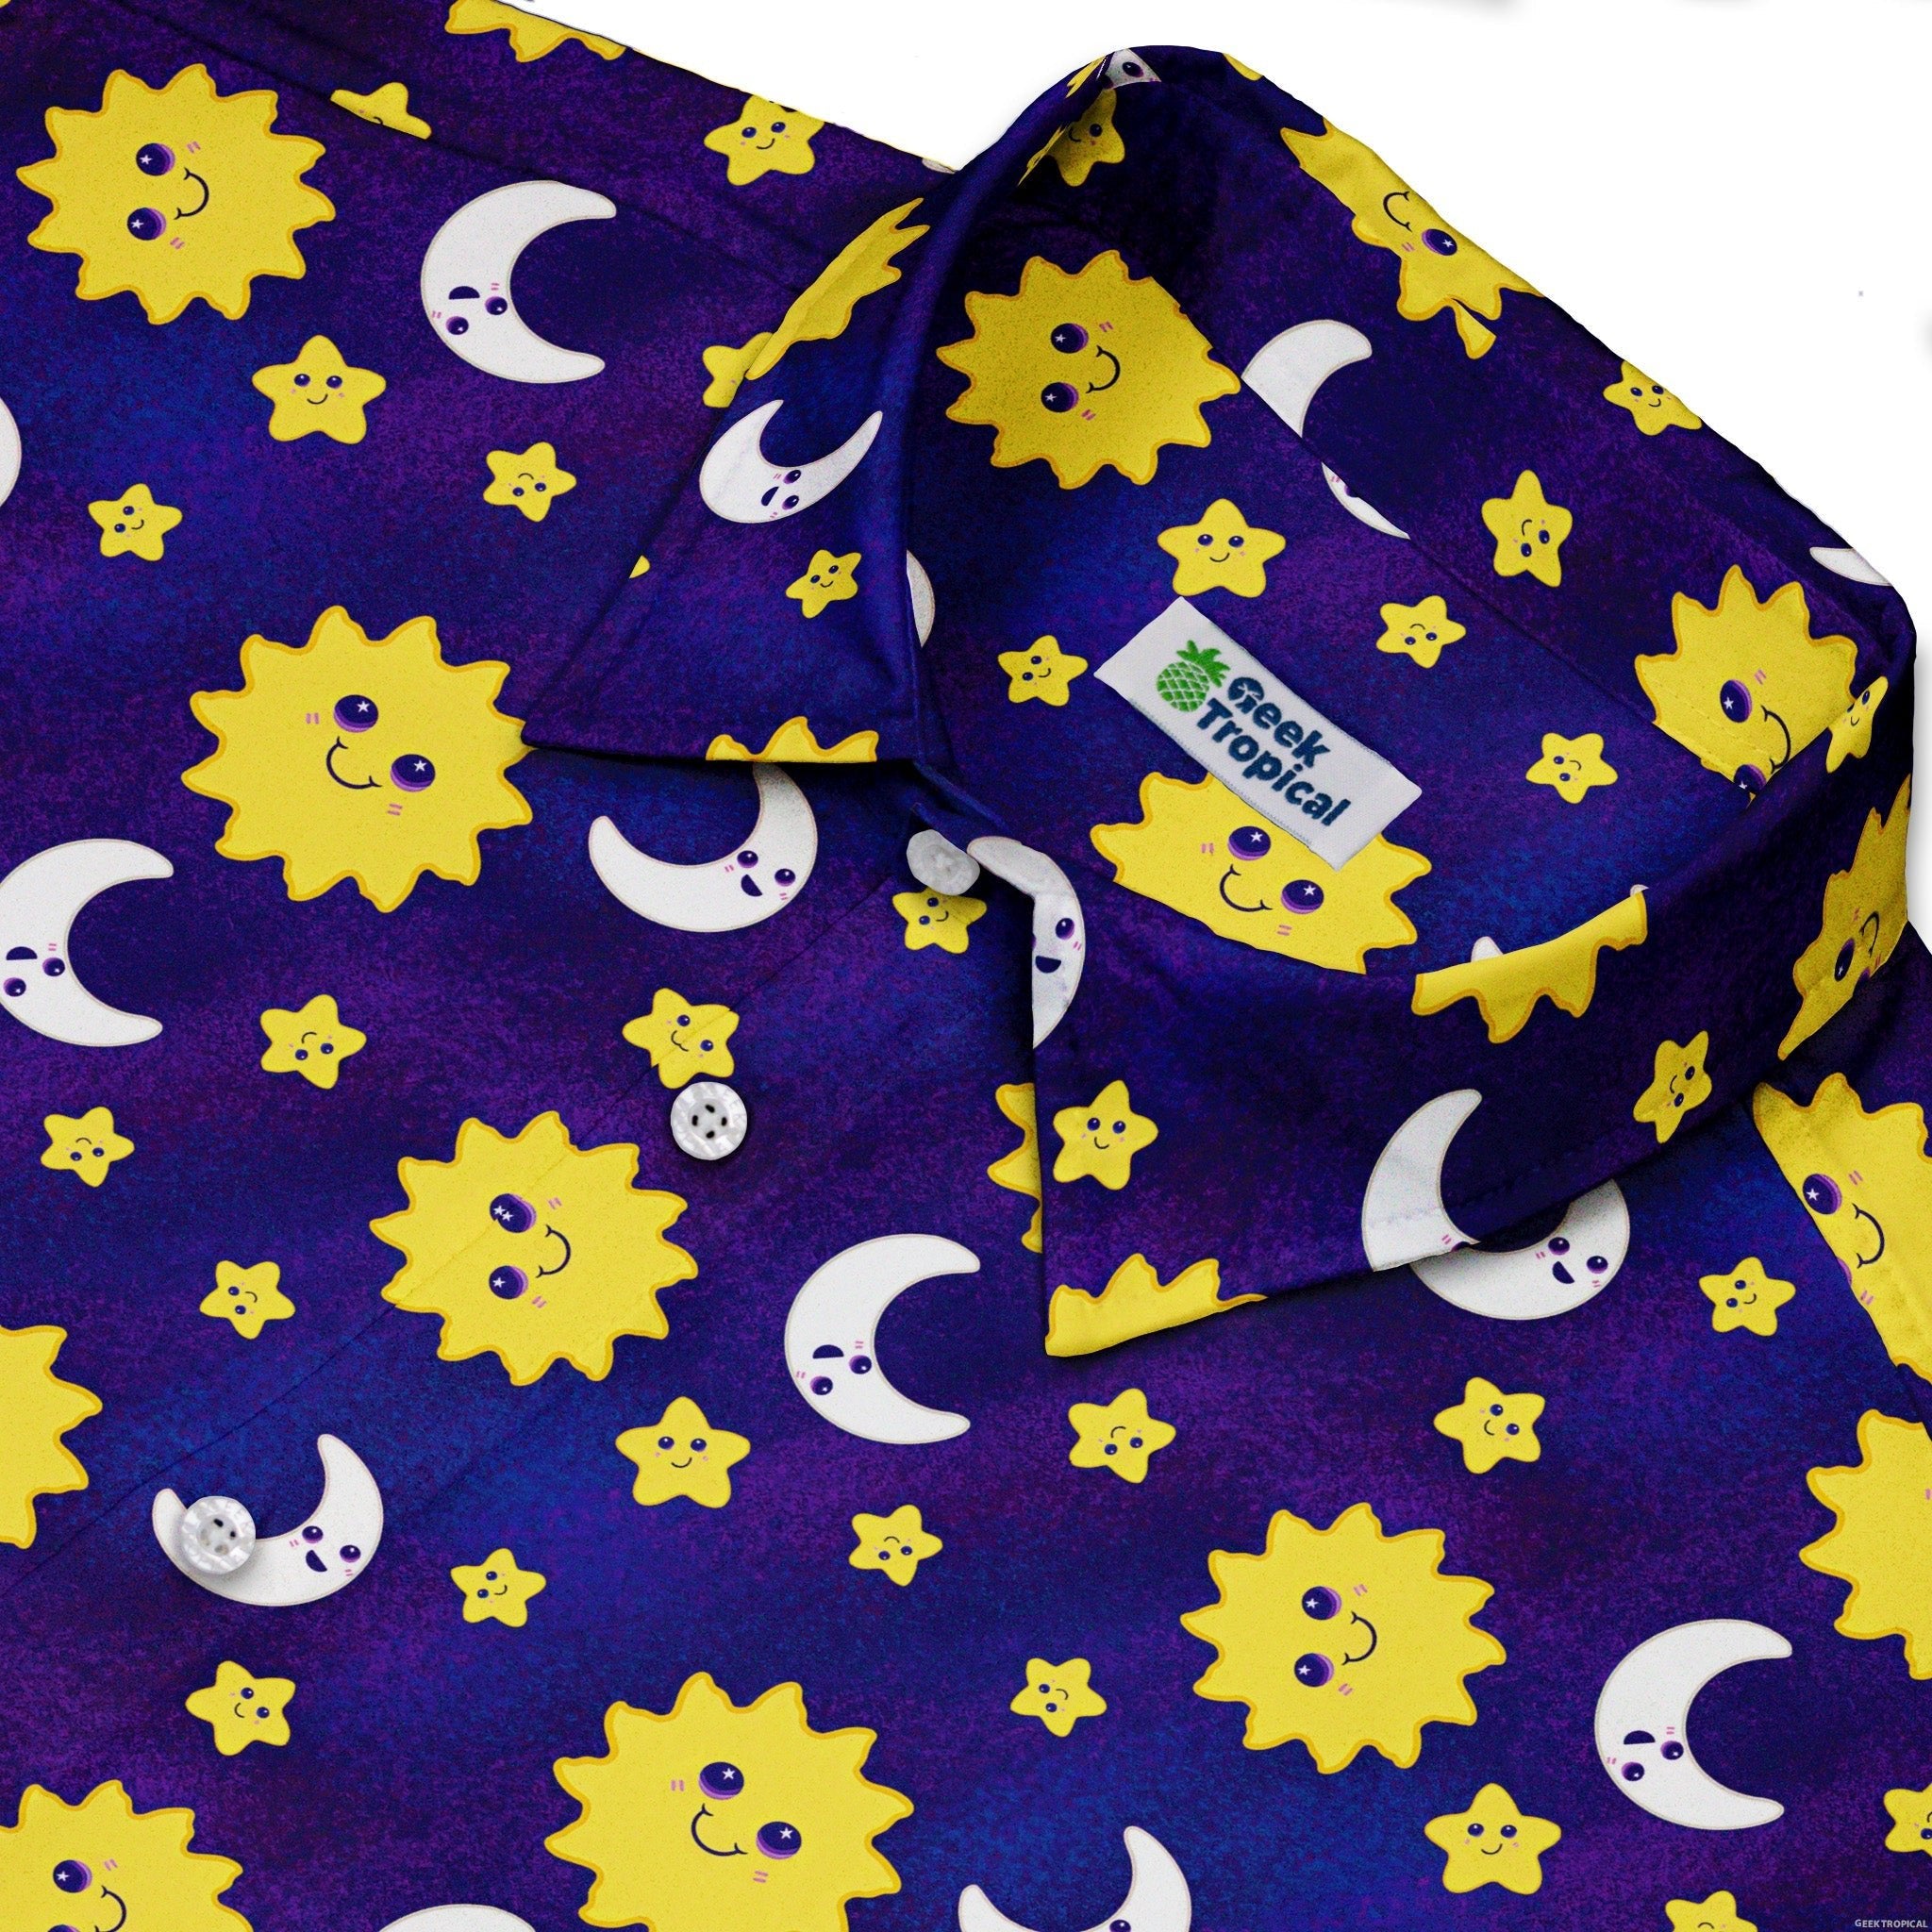 Happy Sun Moon Button Up Shirt - adult sizing - Design by Carla Morrow - outer space & astronaut print